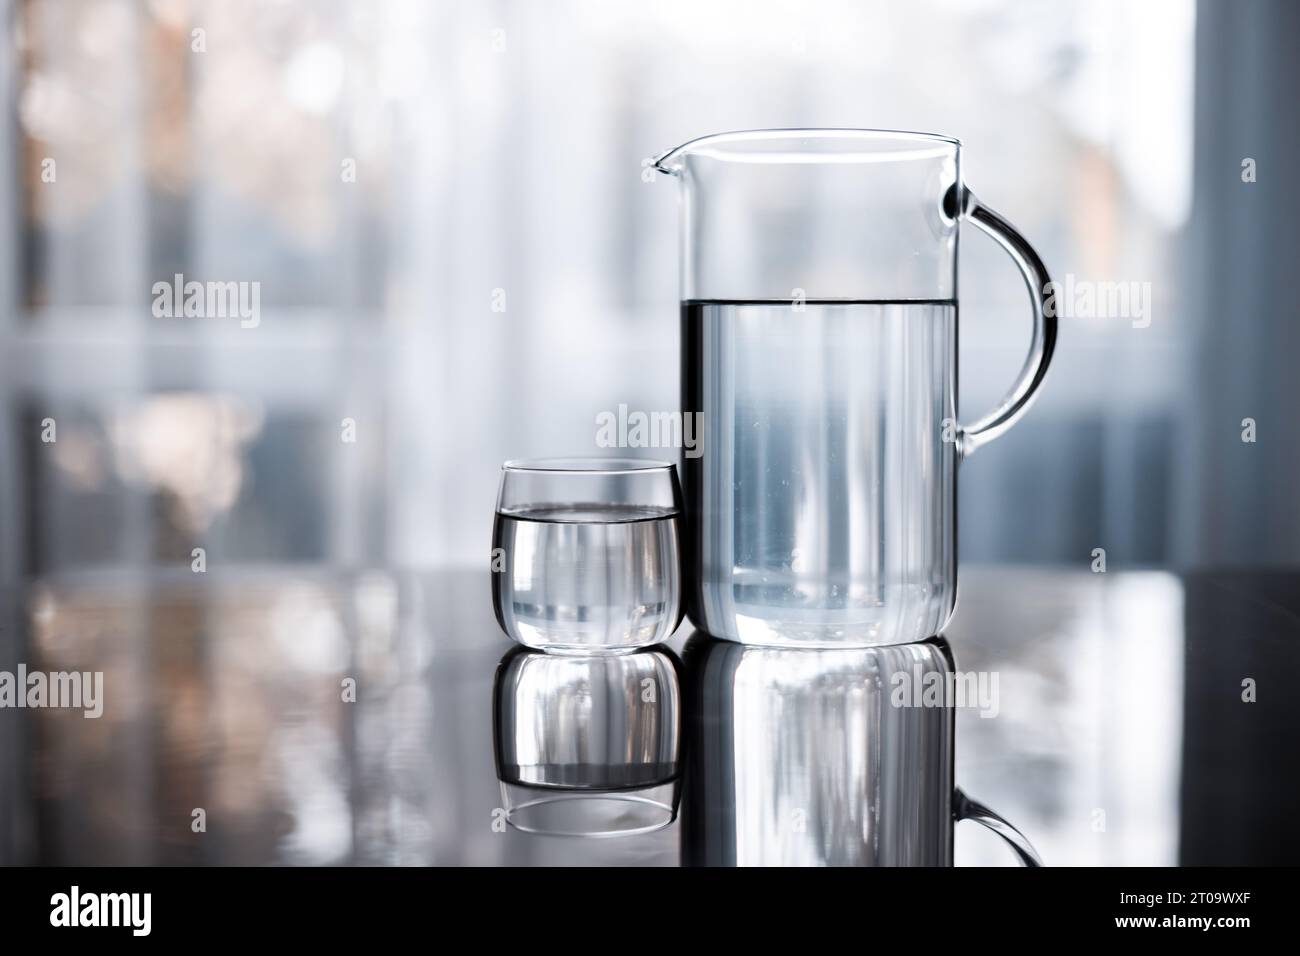 Decanter and glass of water on table on window background Stock Photo